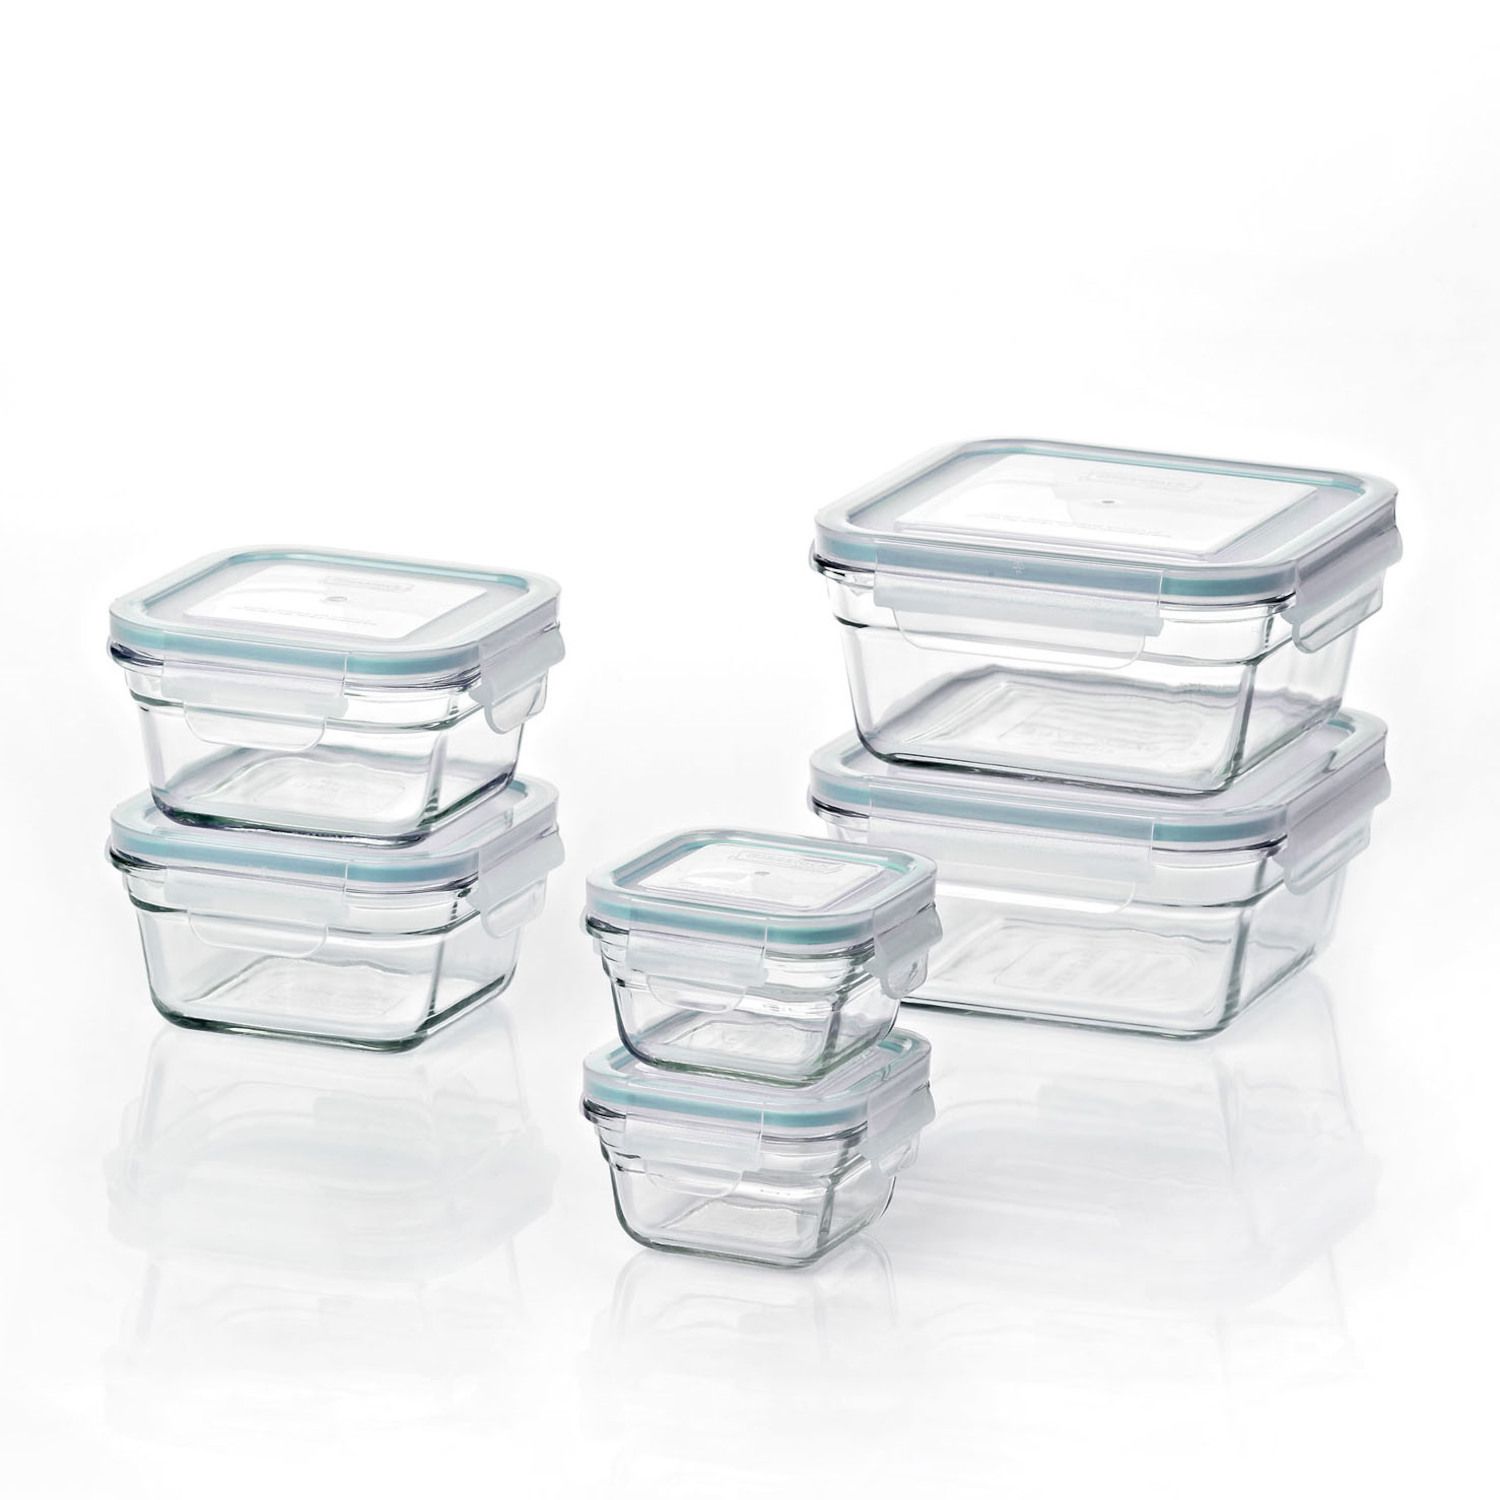 Lock & Lock Purely Better 25-oz. Glass Divided Food Storage Container